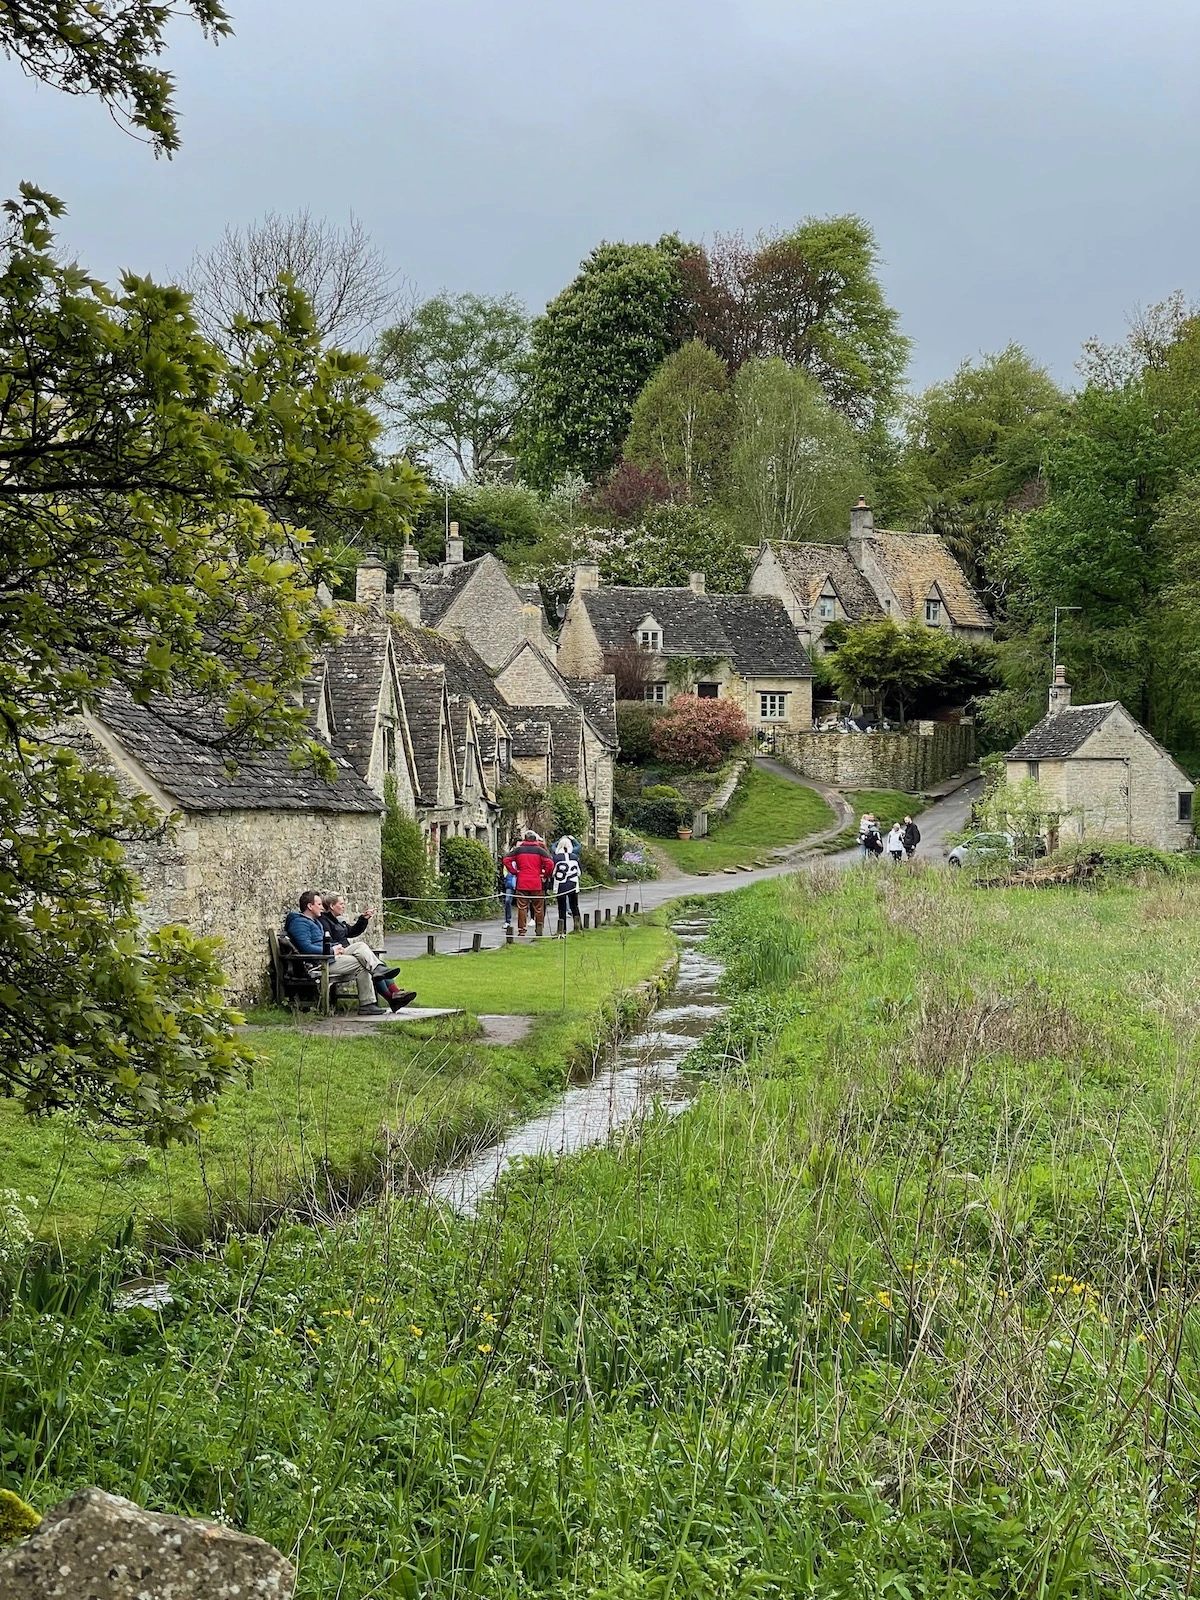 Bibury Village in the Cotswolds, England